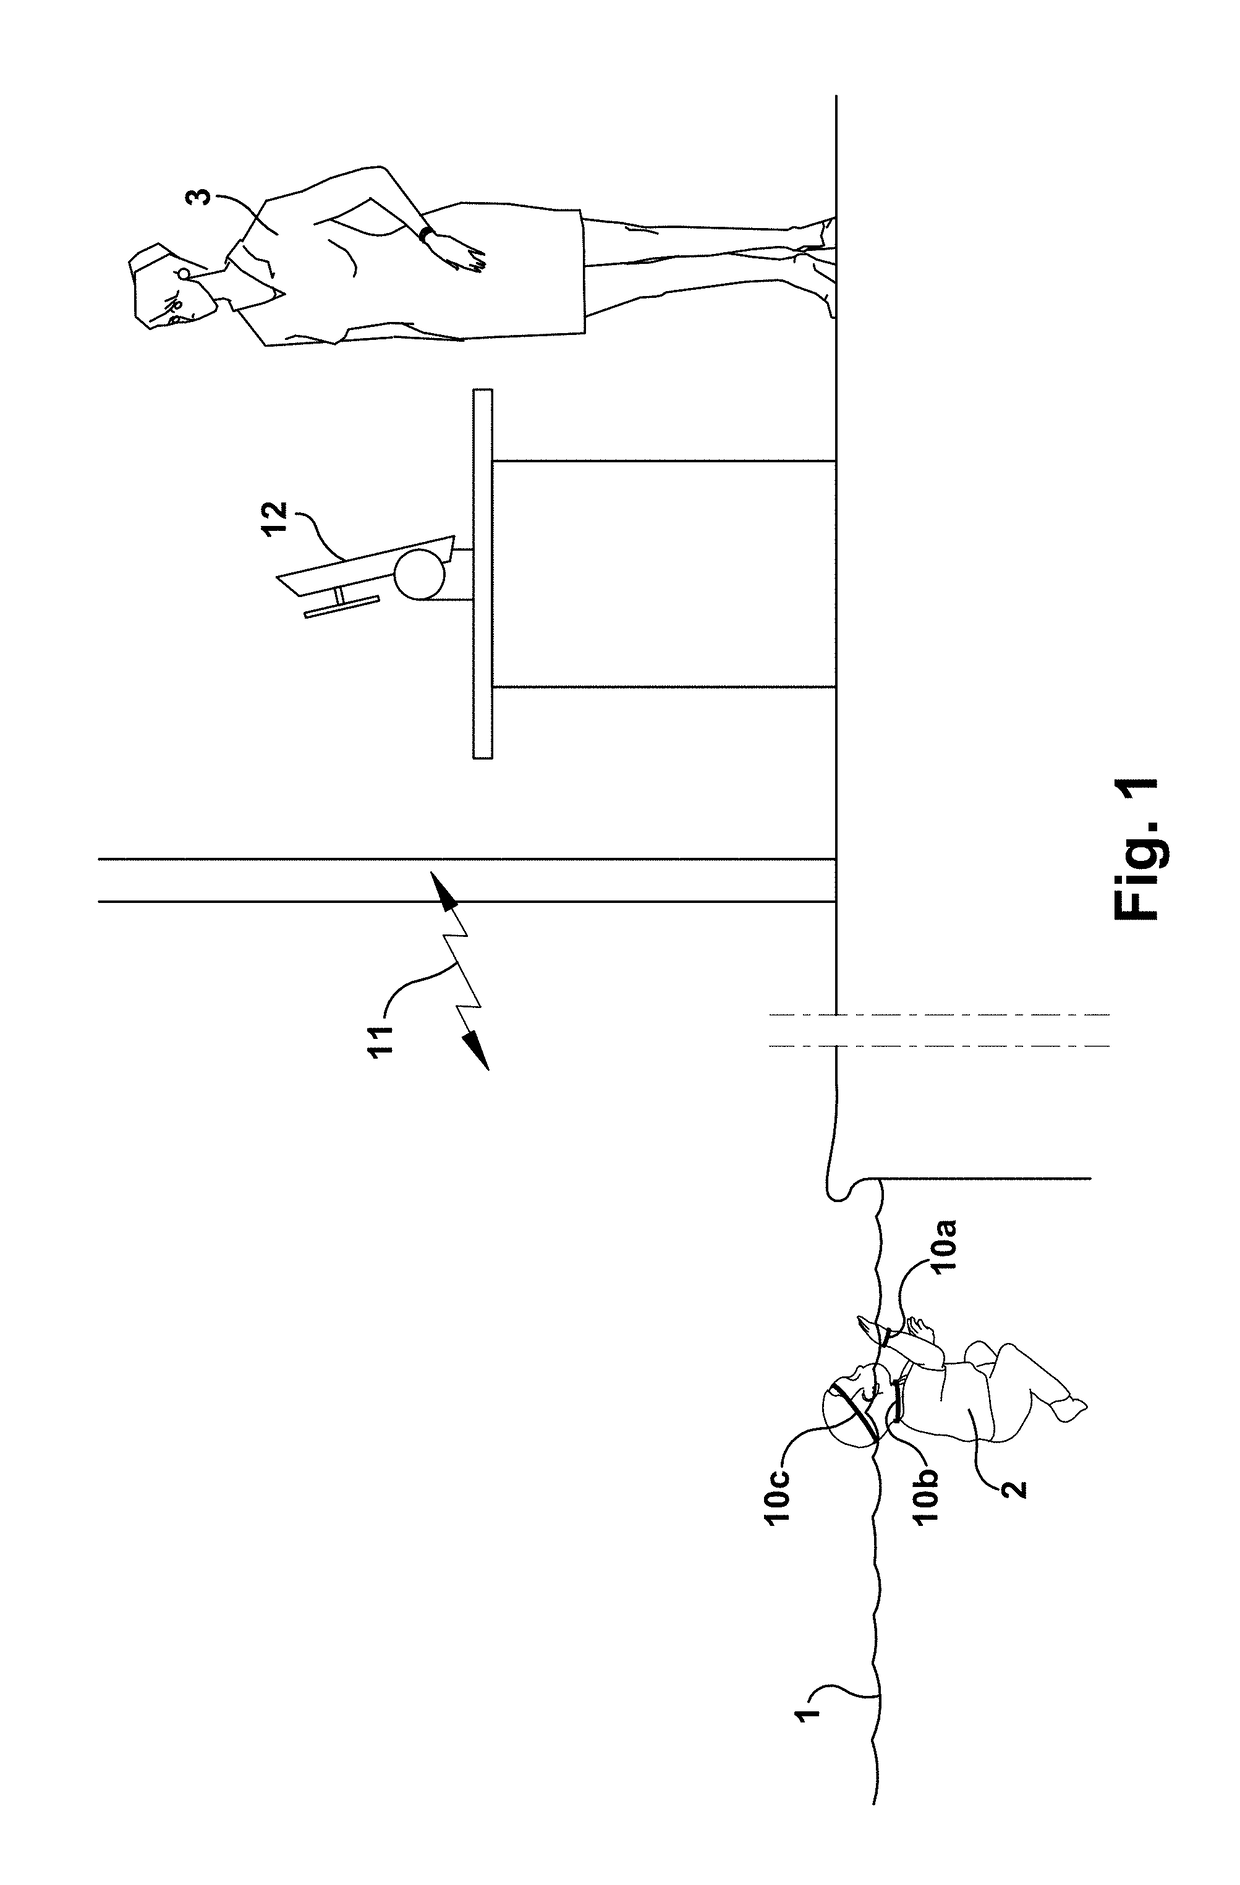 System, Device, and Method of Detecting Dangerous Situations